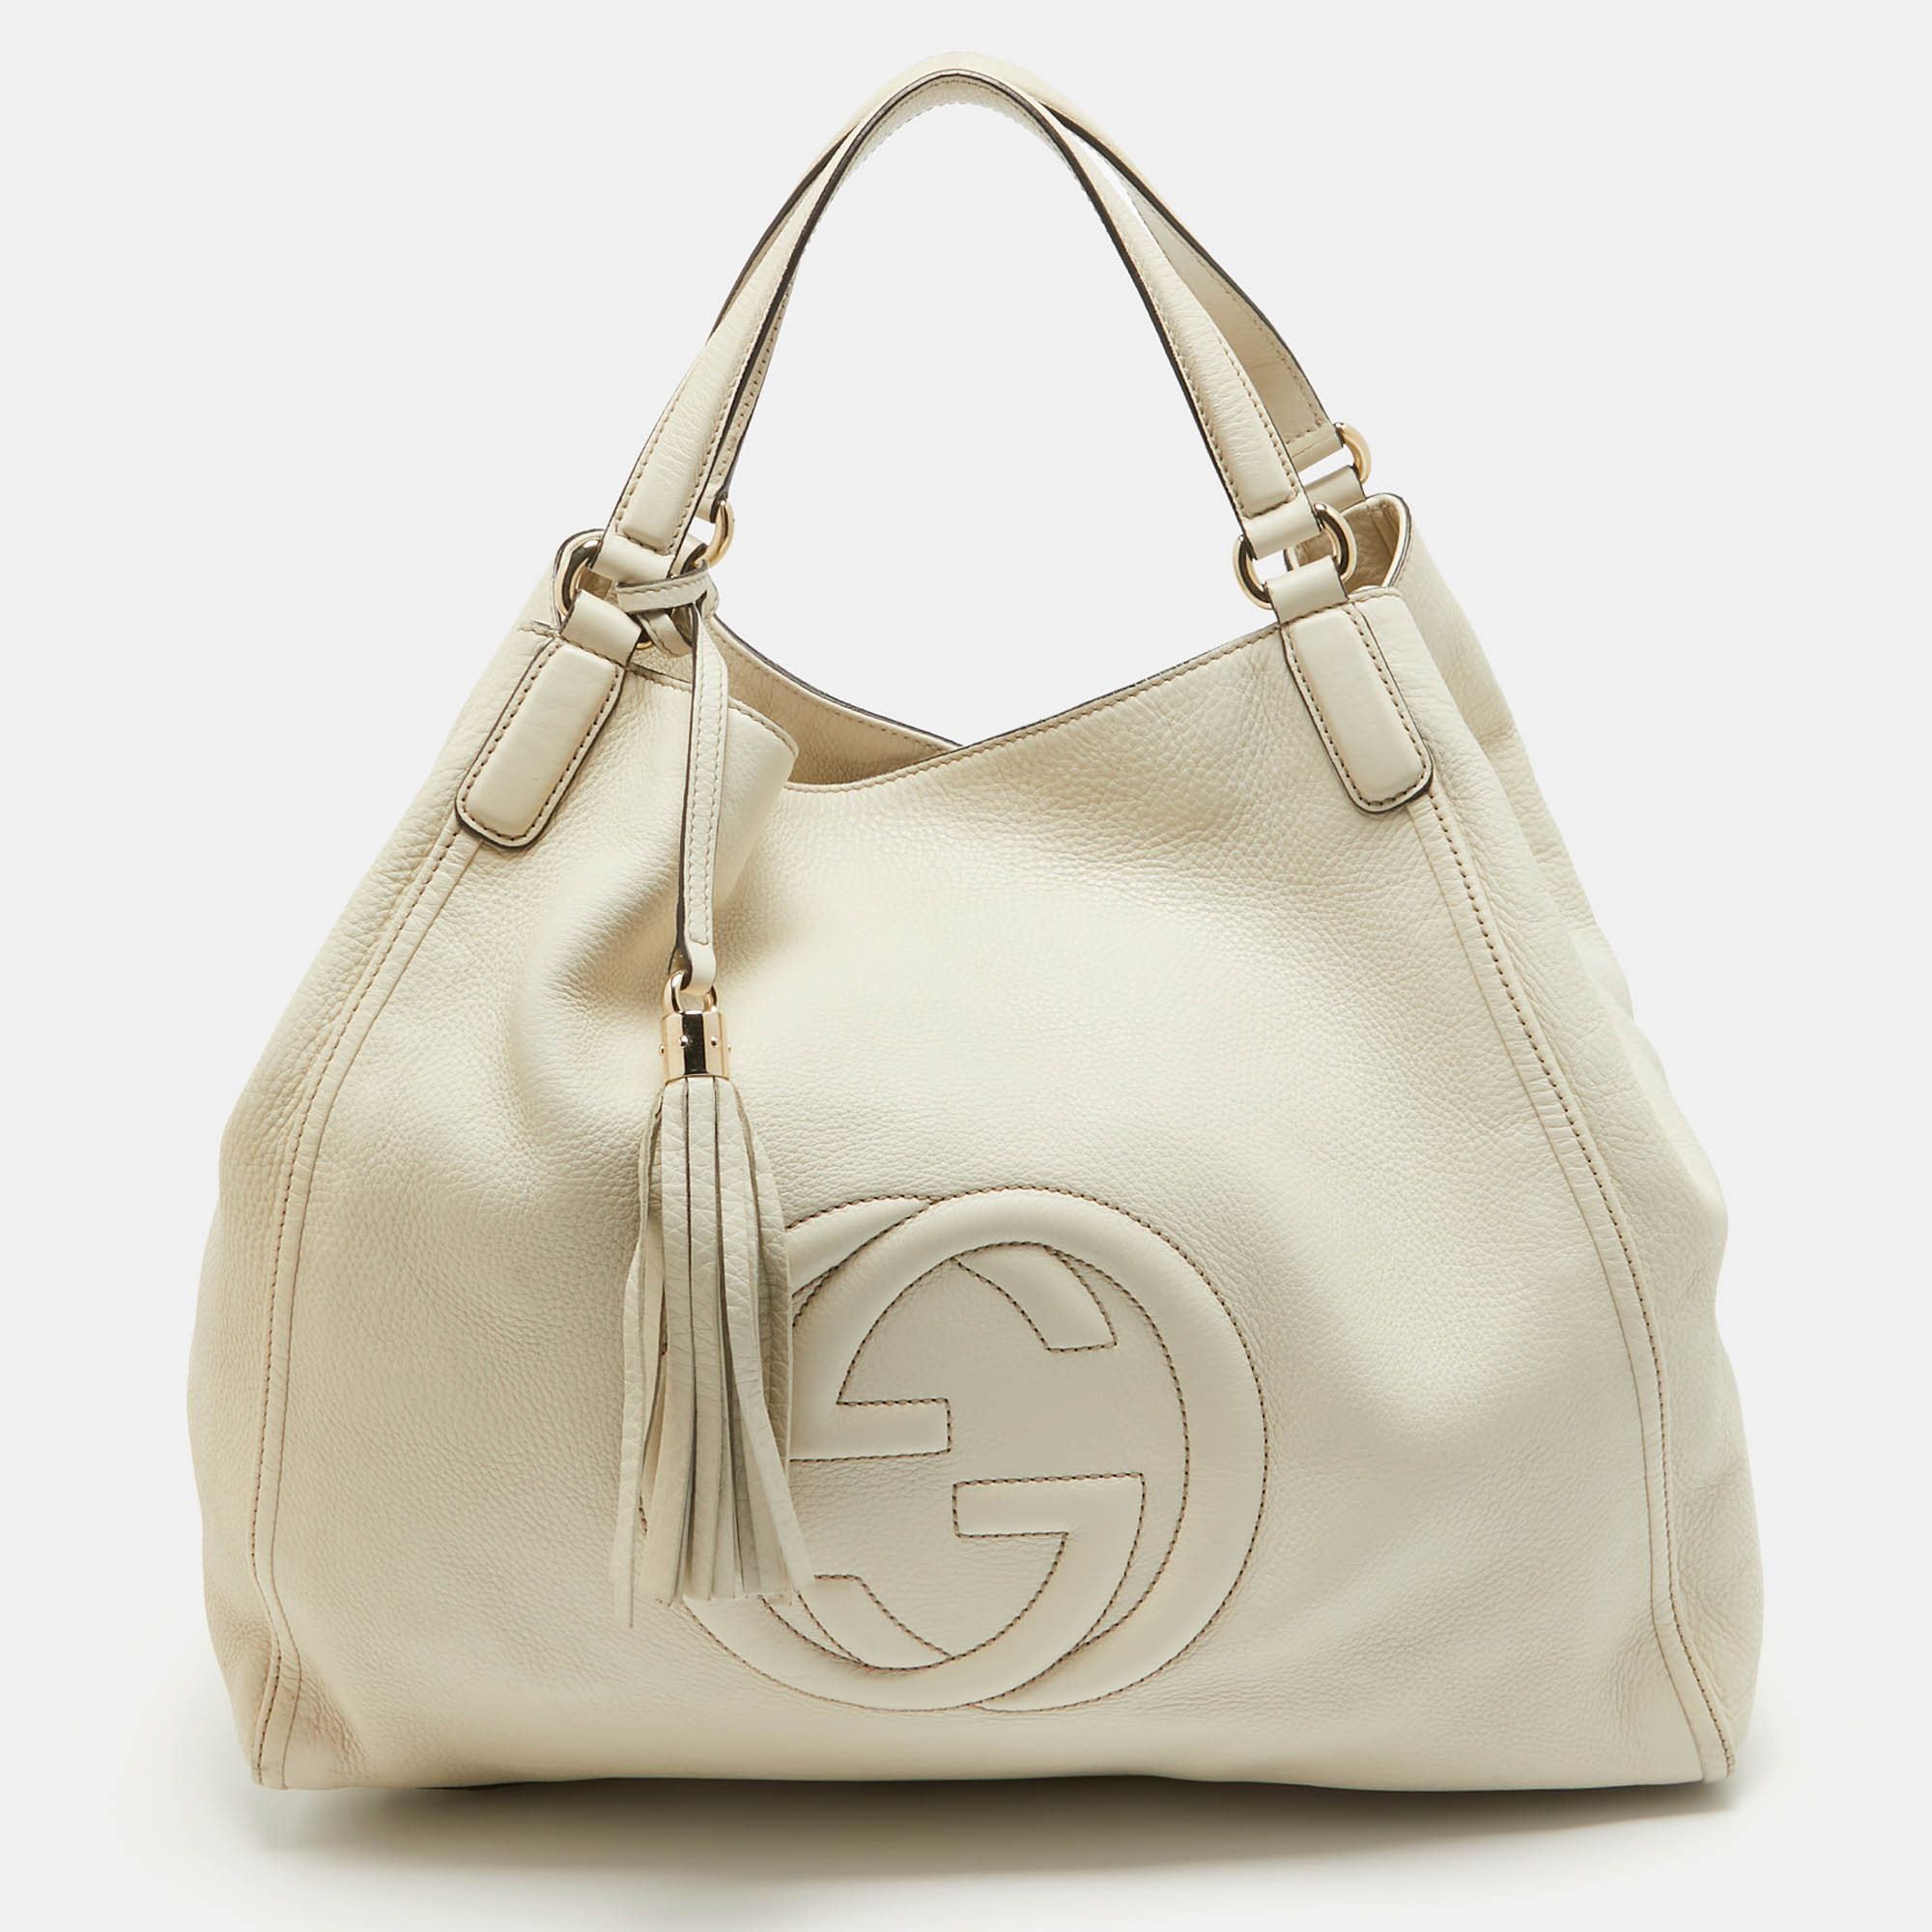 Gucci off white leather large soho tote